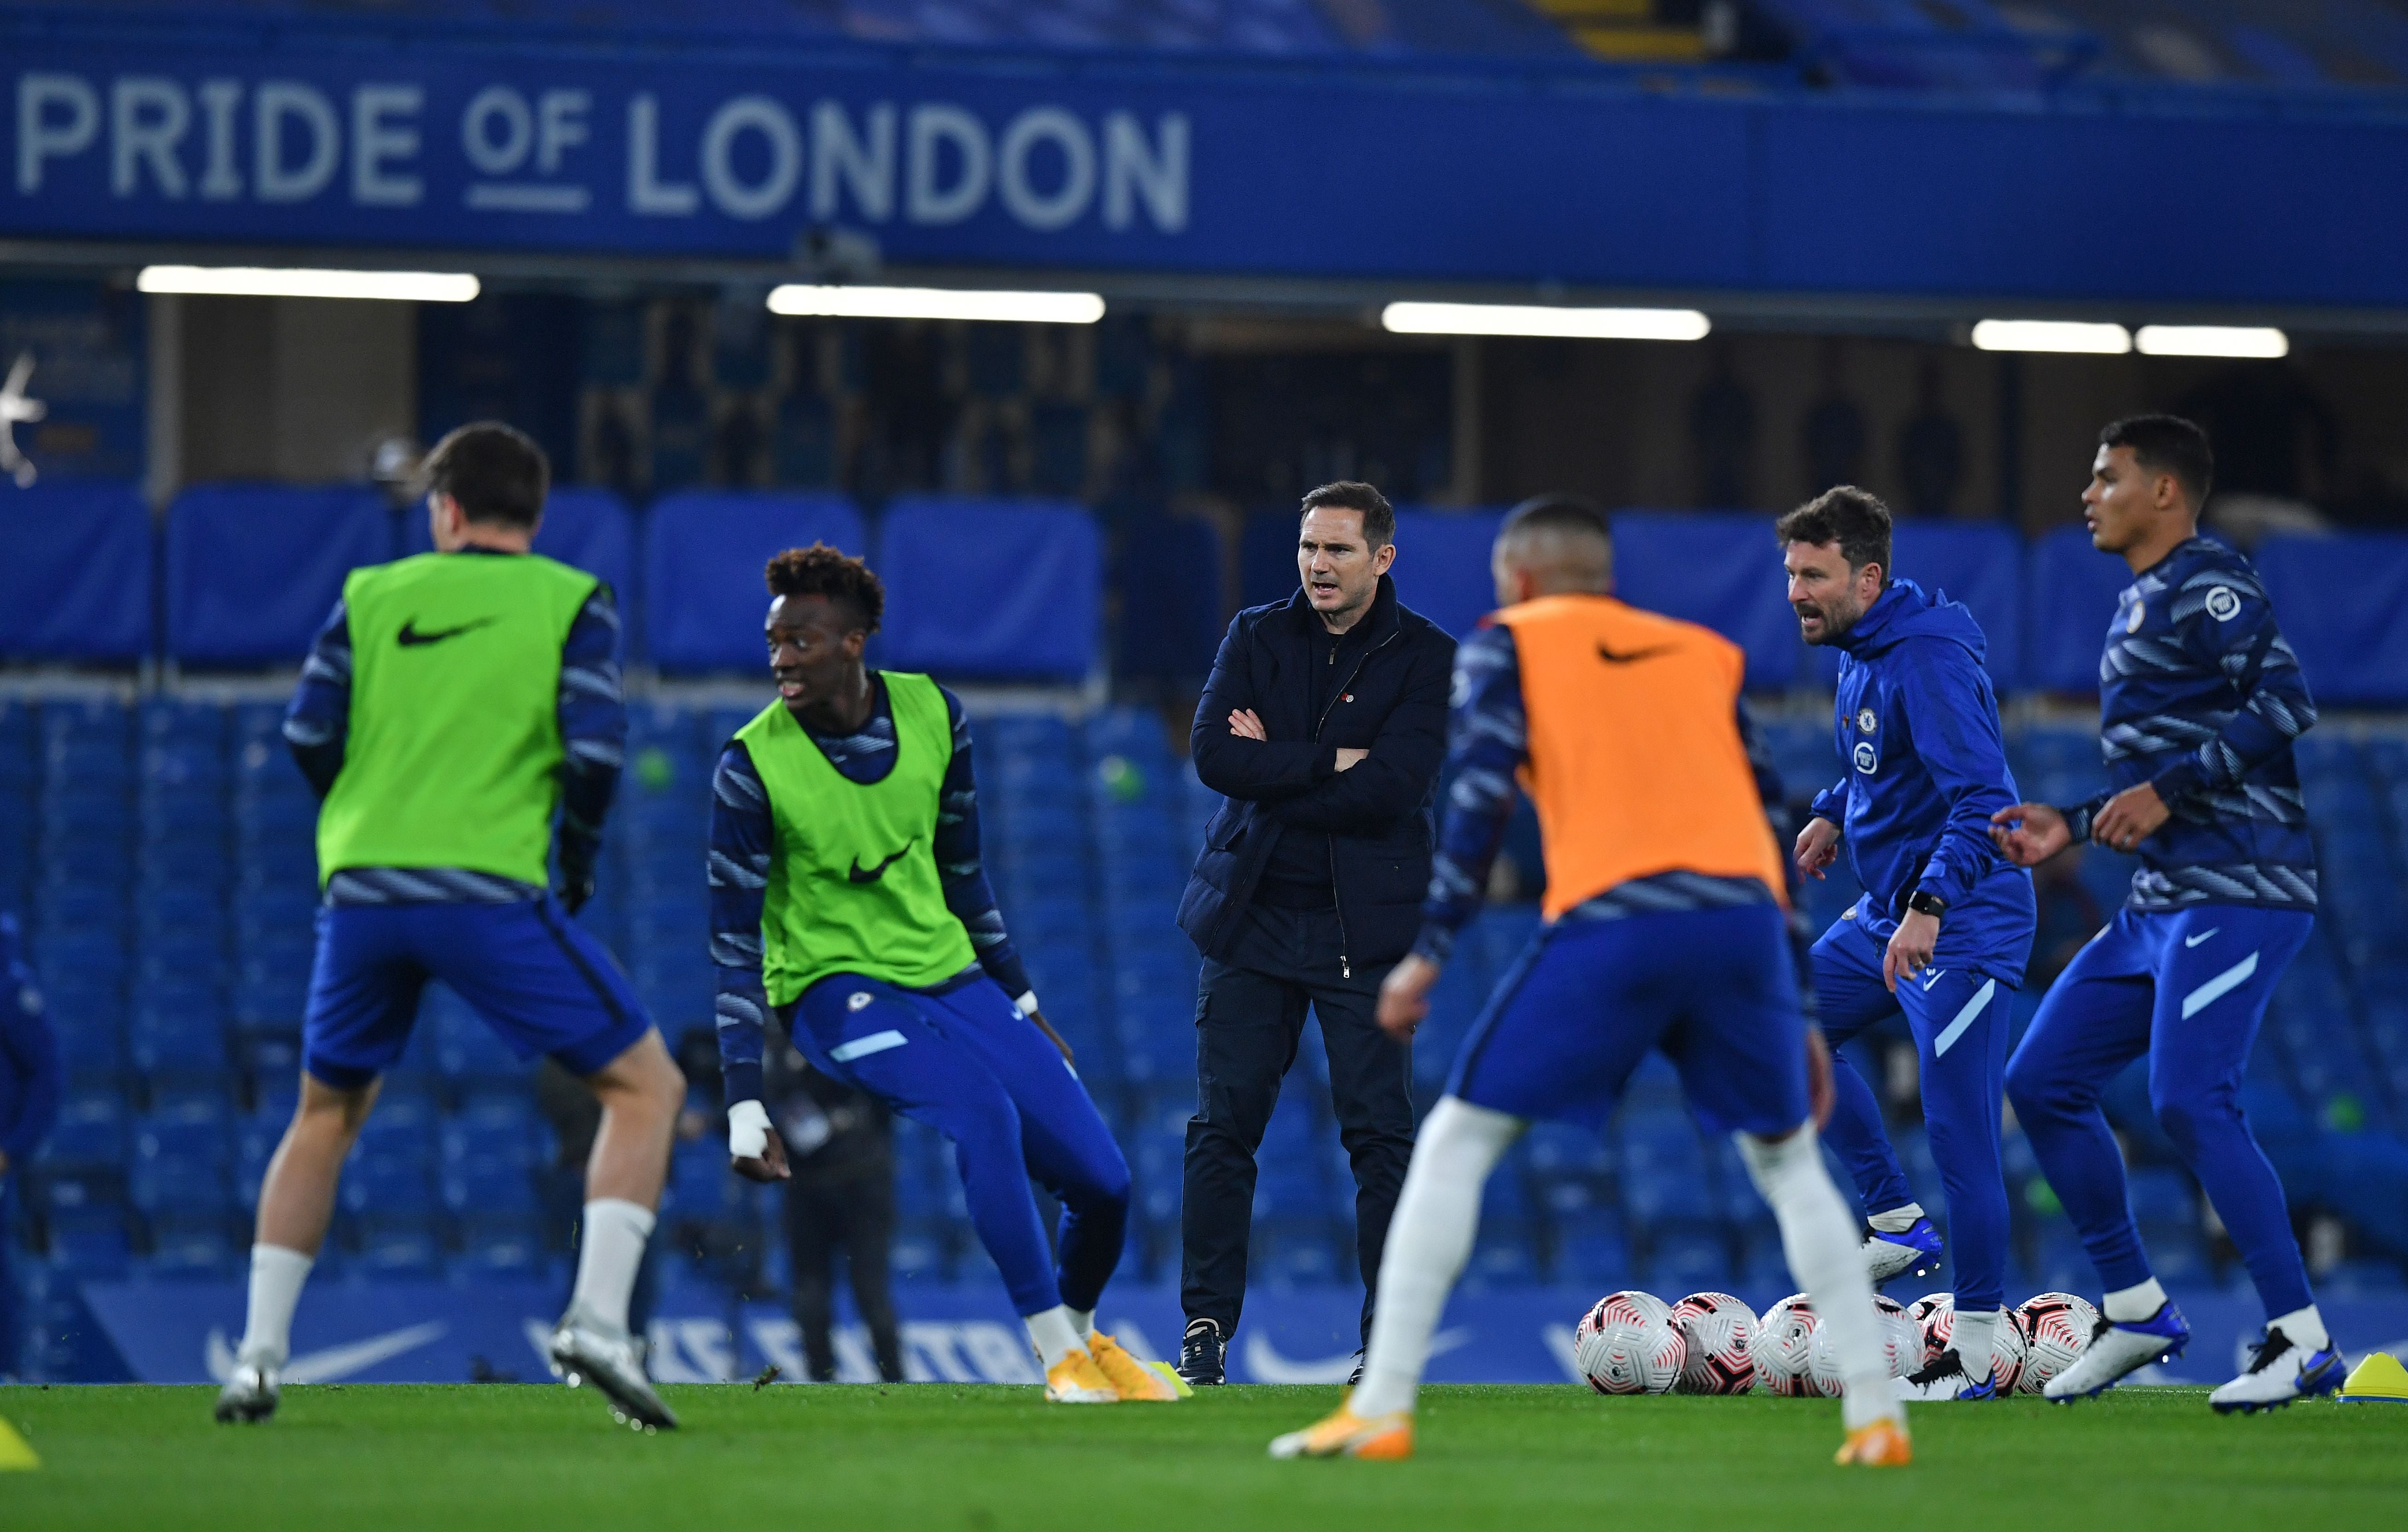 Chelsea coach Frank Lampard must keep each player in his deep squad happy